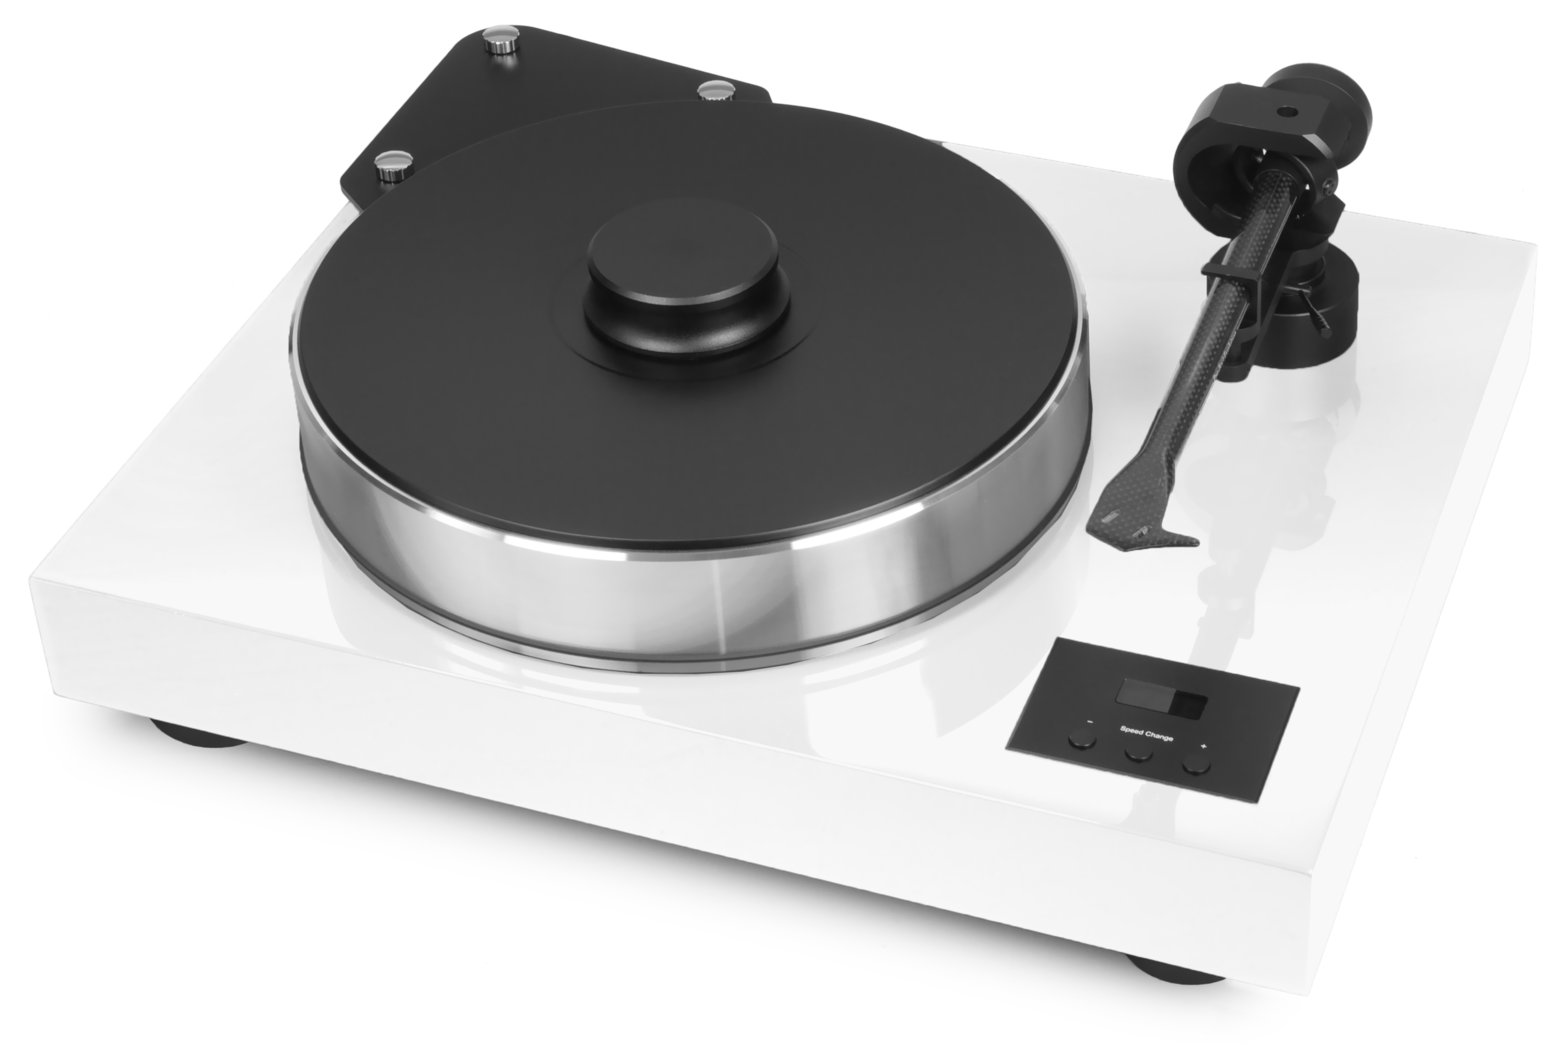 Pro-Ject Xtension 10 Evolution turntable